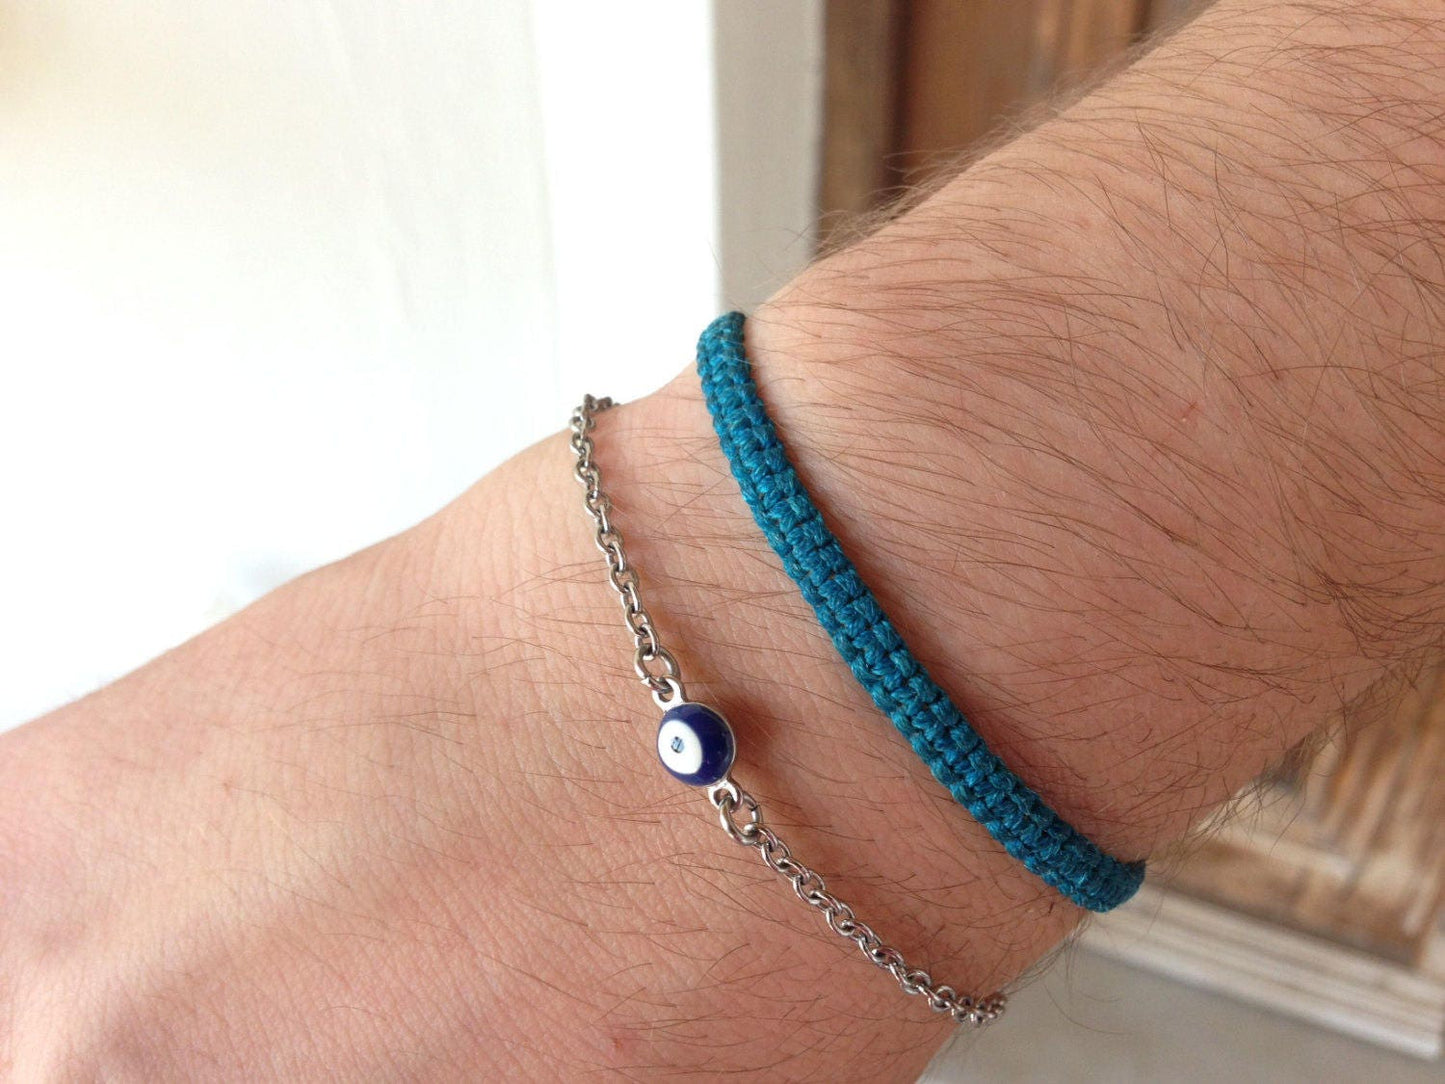 Evil eye bracelet  - dark blue eye - stainless steel - protection - Greek jewelry - Gift for her or for him - stainless jewelry